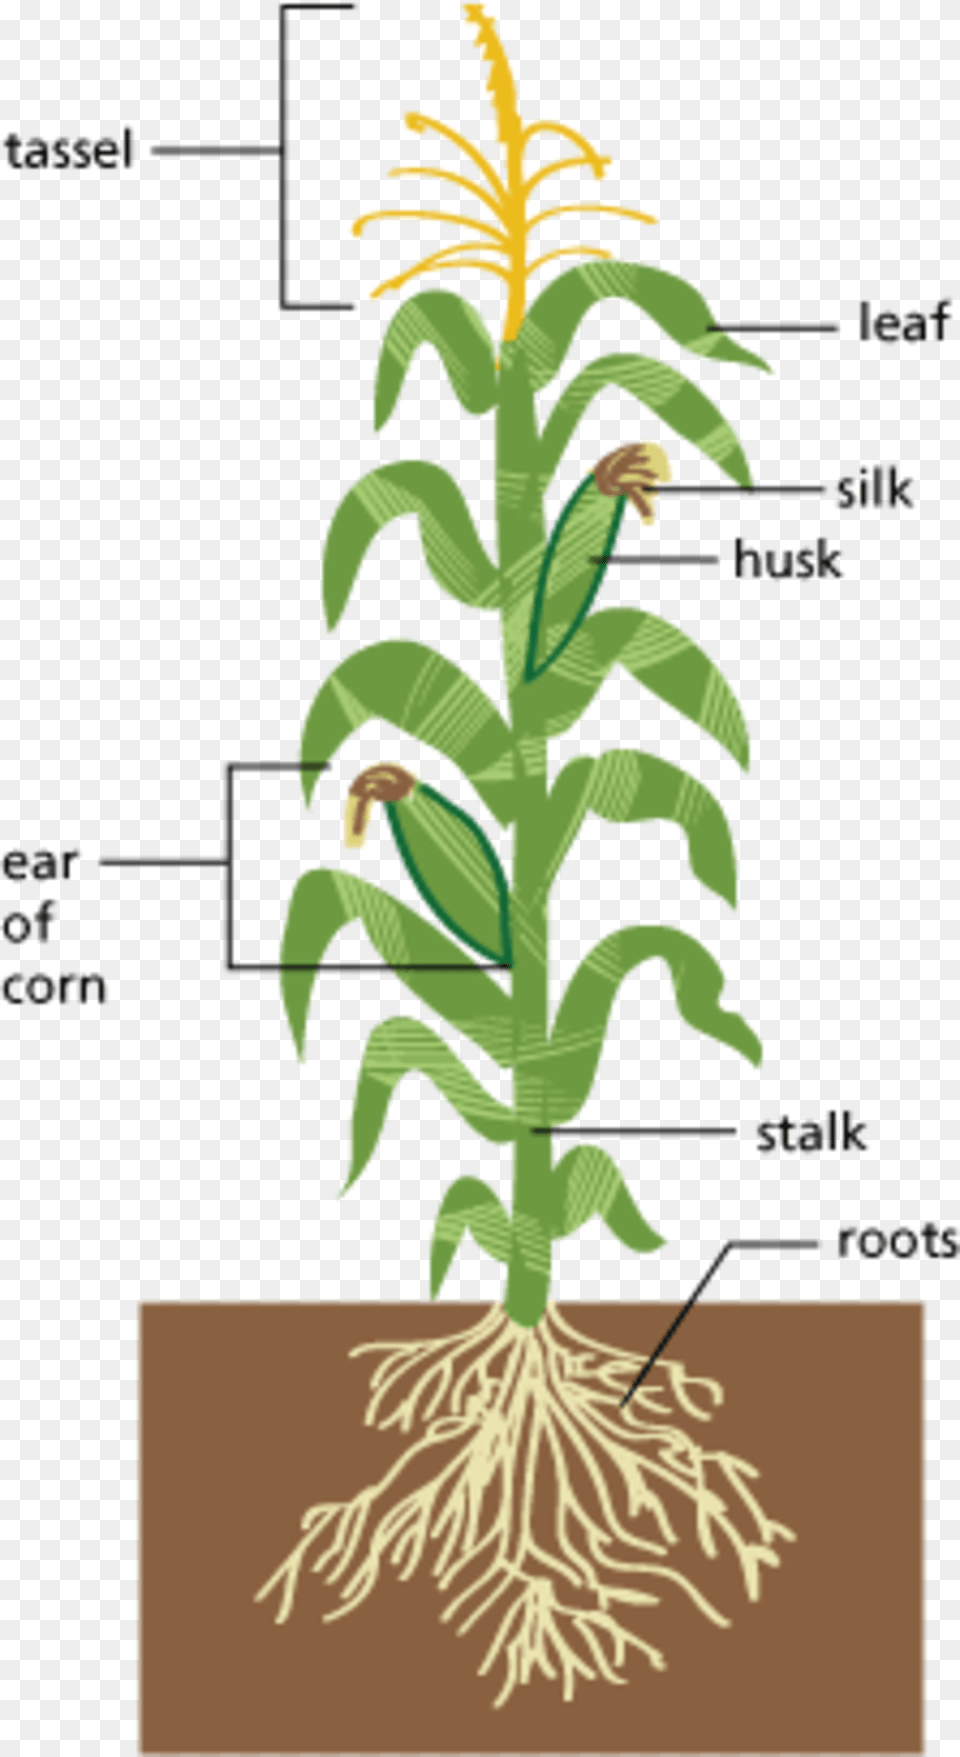 Of Edible Parts Of A Plant Diagram Large Size Parts Of A Corn Plant Diagram, Leaf, Fern, Grass, Person Free Png